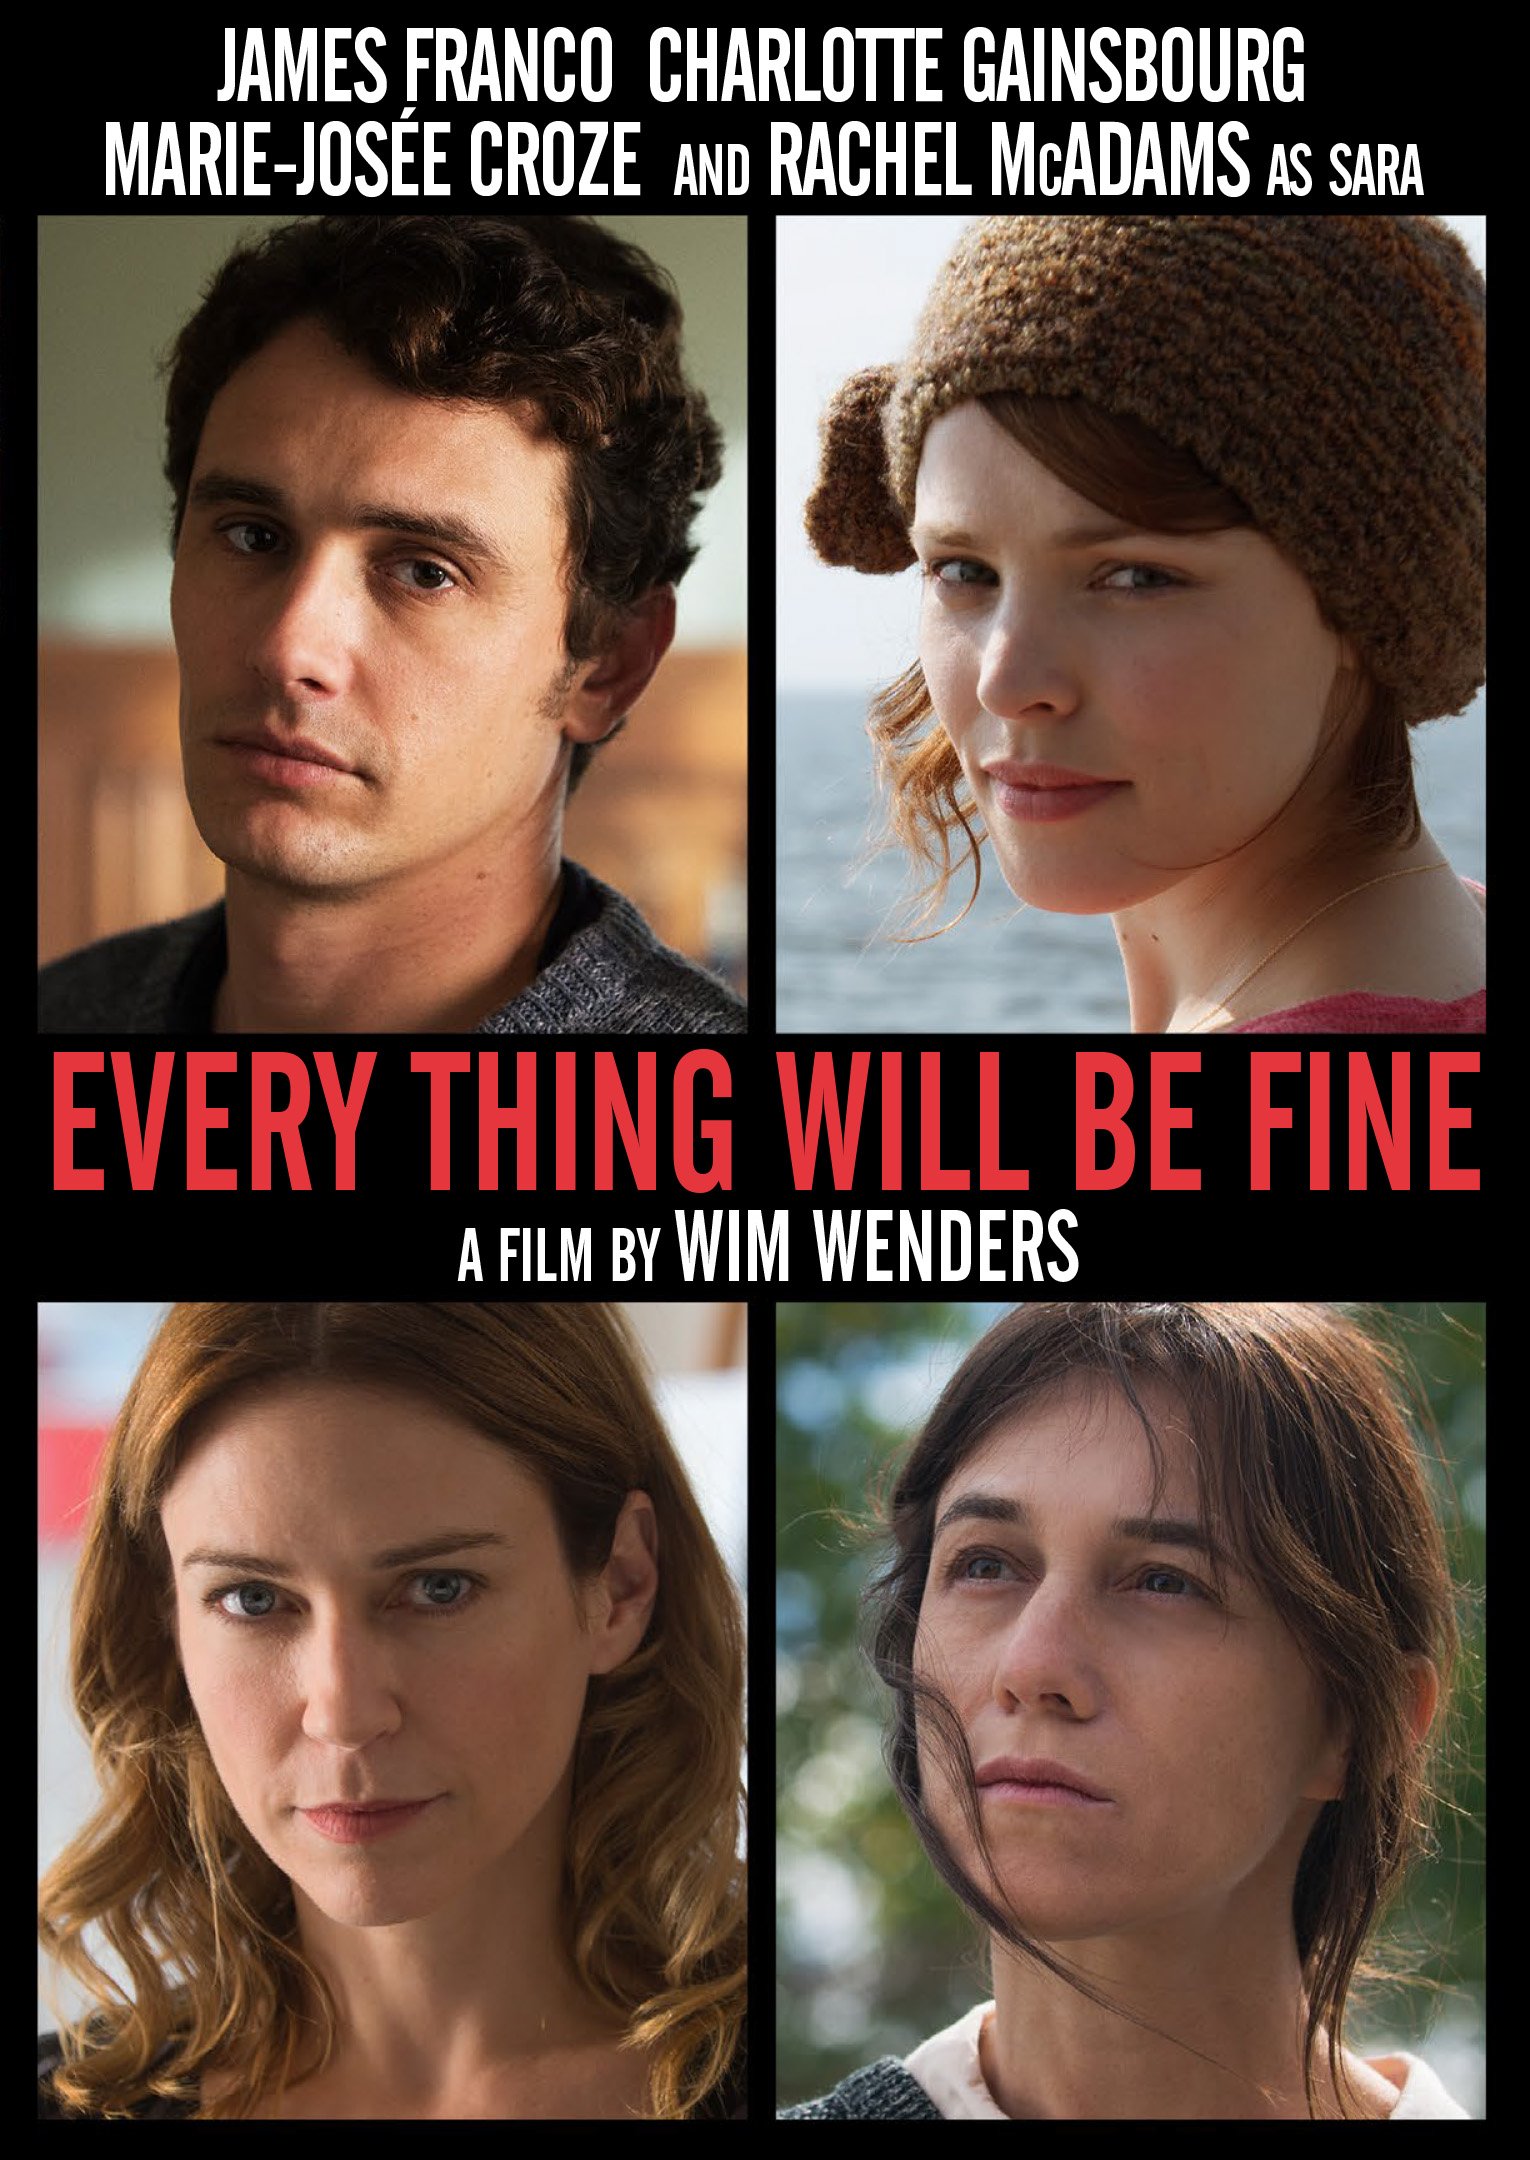 Every Thing Will Be Fine DVD Release Date June 7, 20161530 x 2160